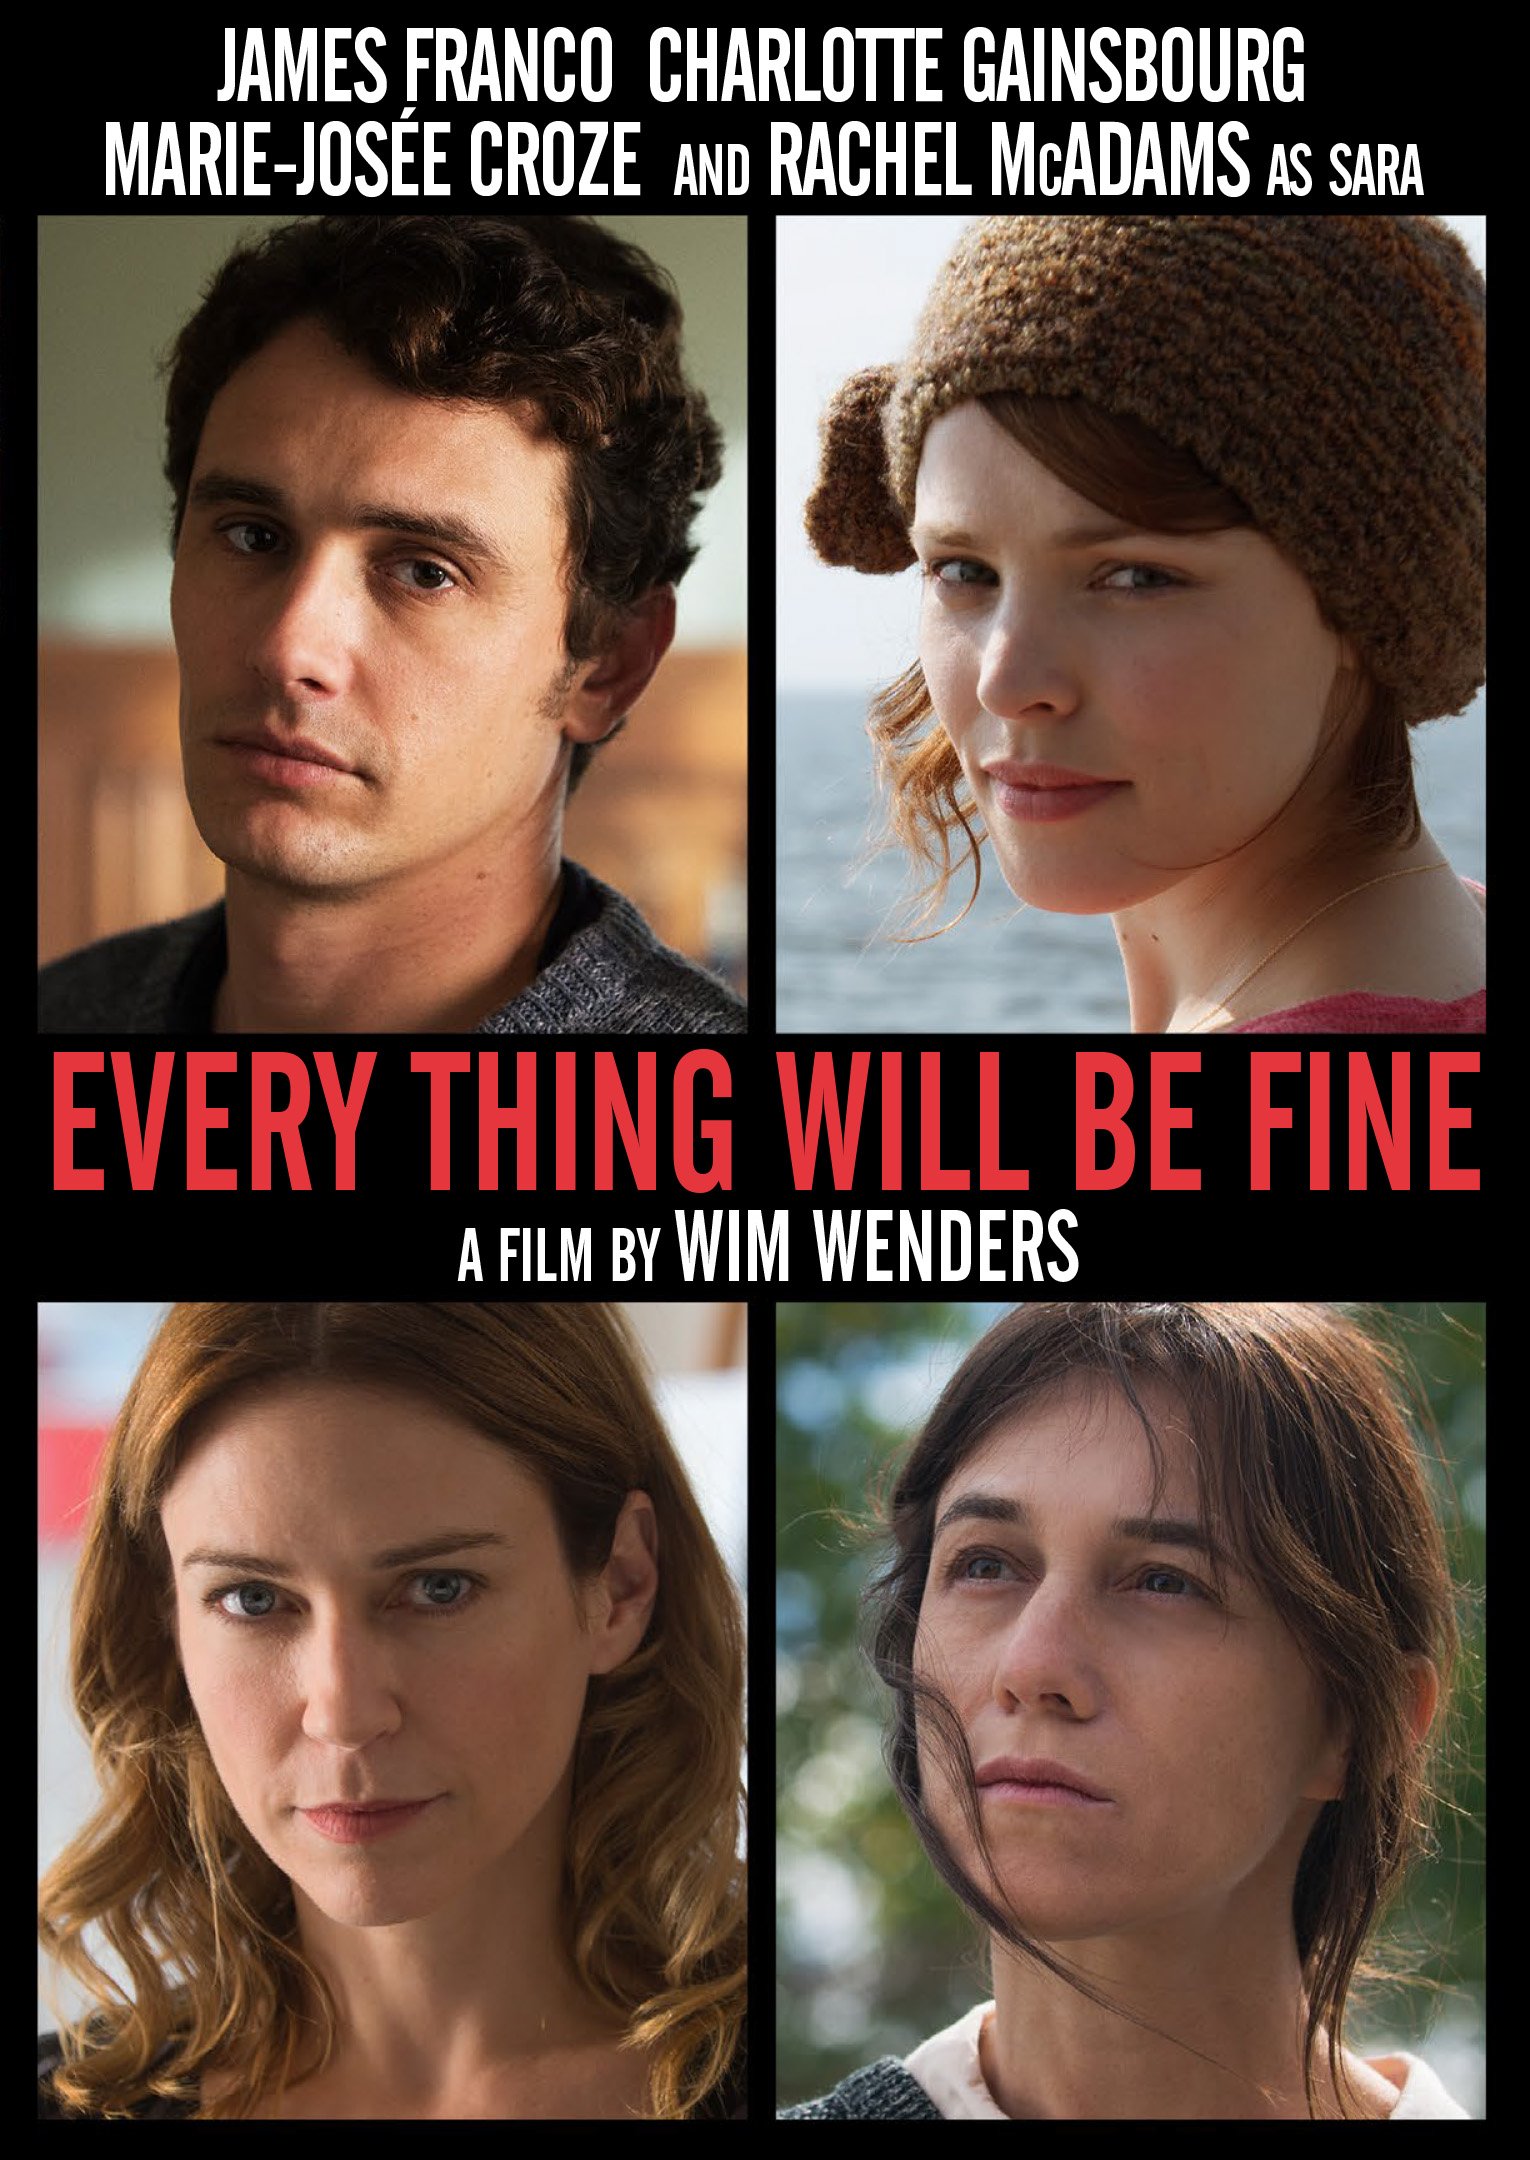 Every Thing Will Be Fine DVD Release Date June 7, 20161530 x 2160